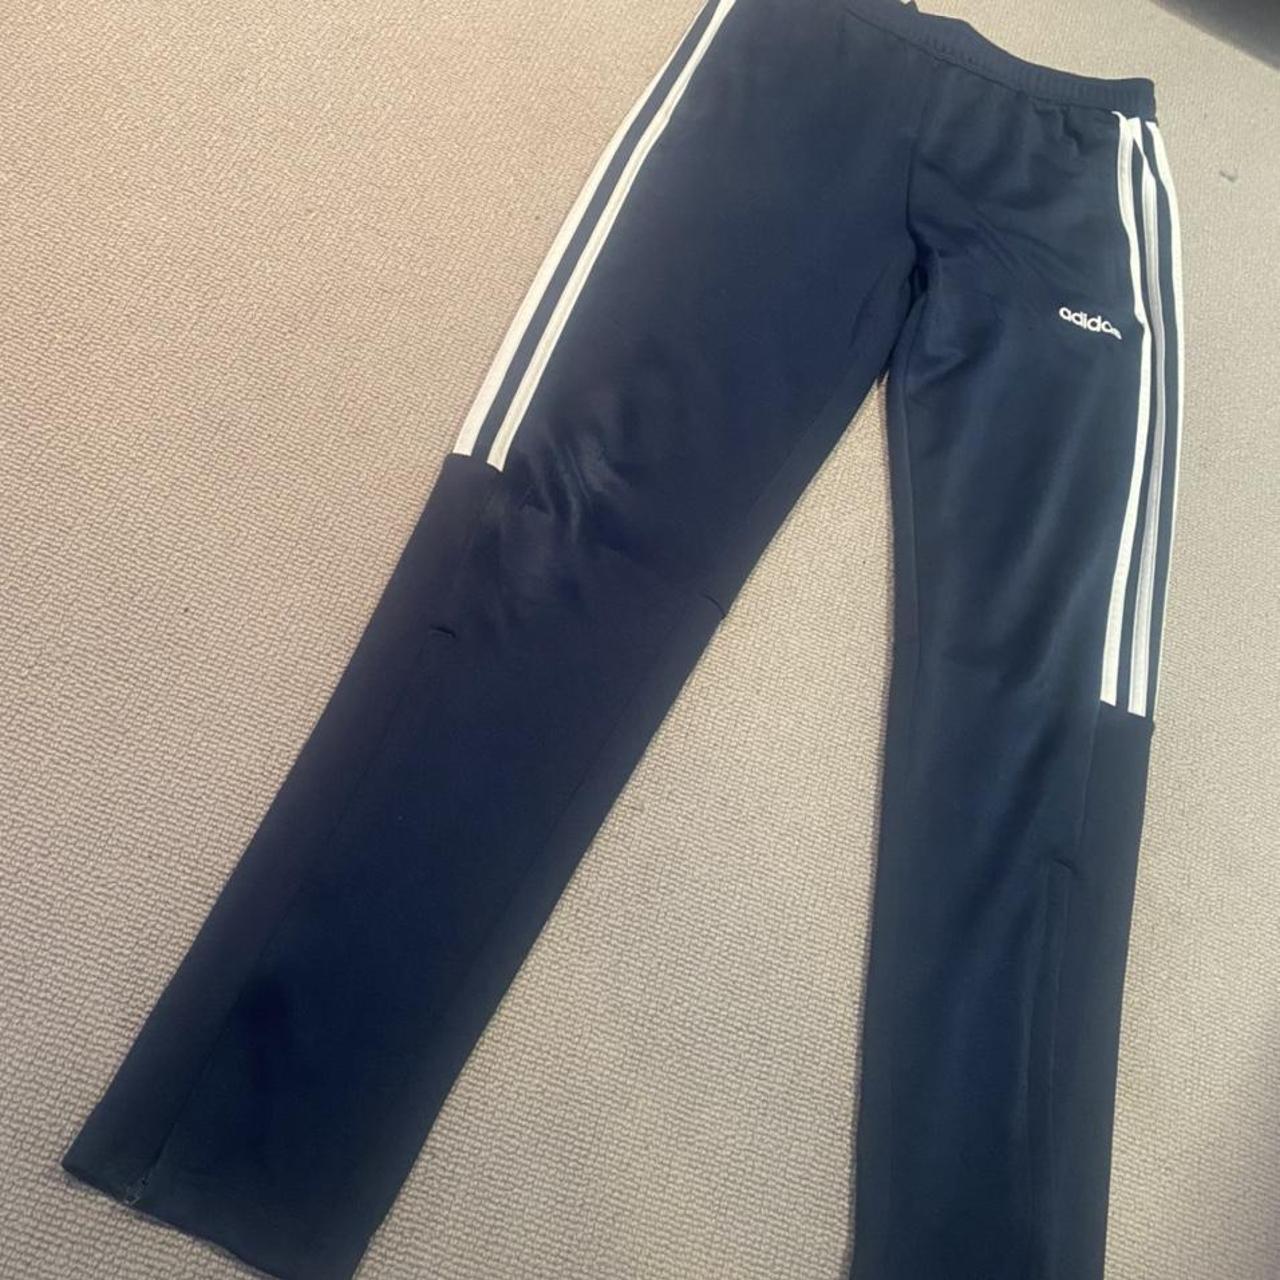 Adidas tracksuit. Age 12-15. Great condition. - Depop